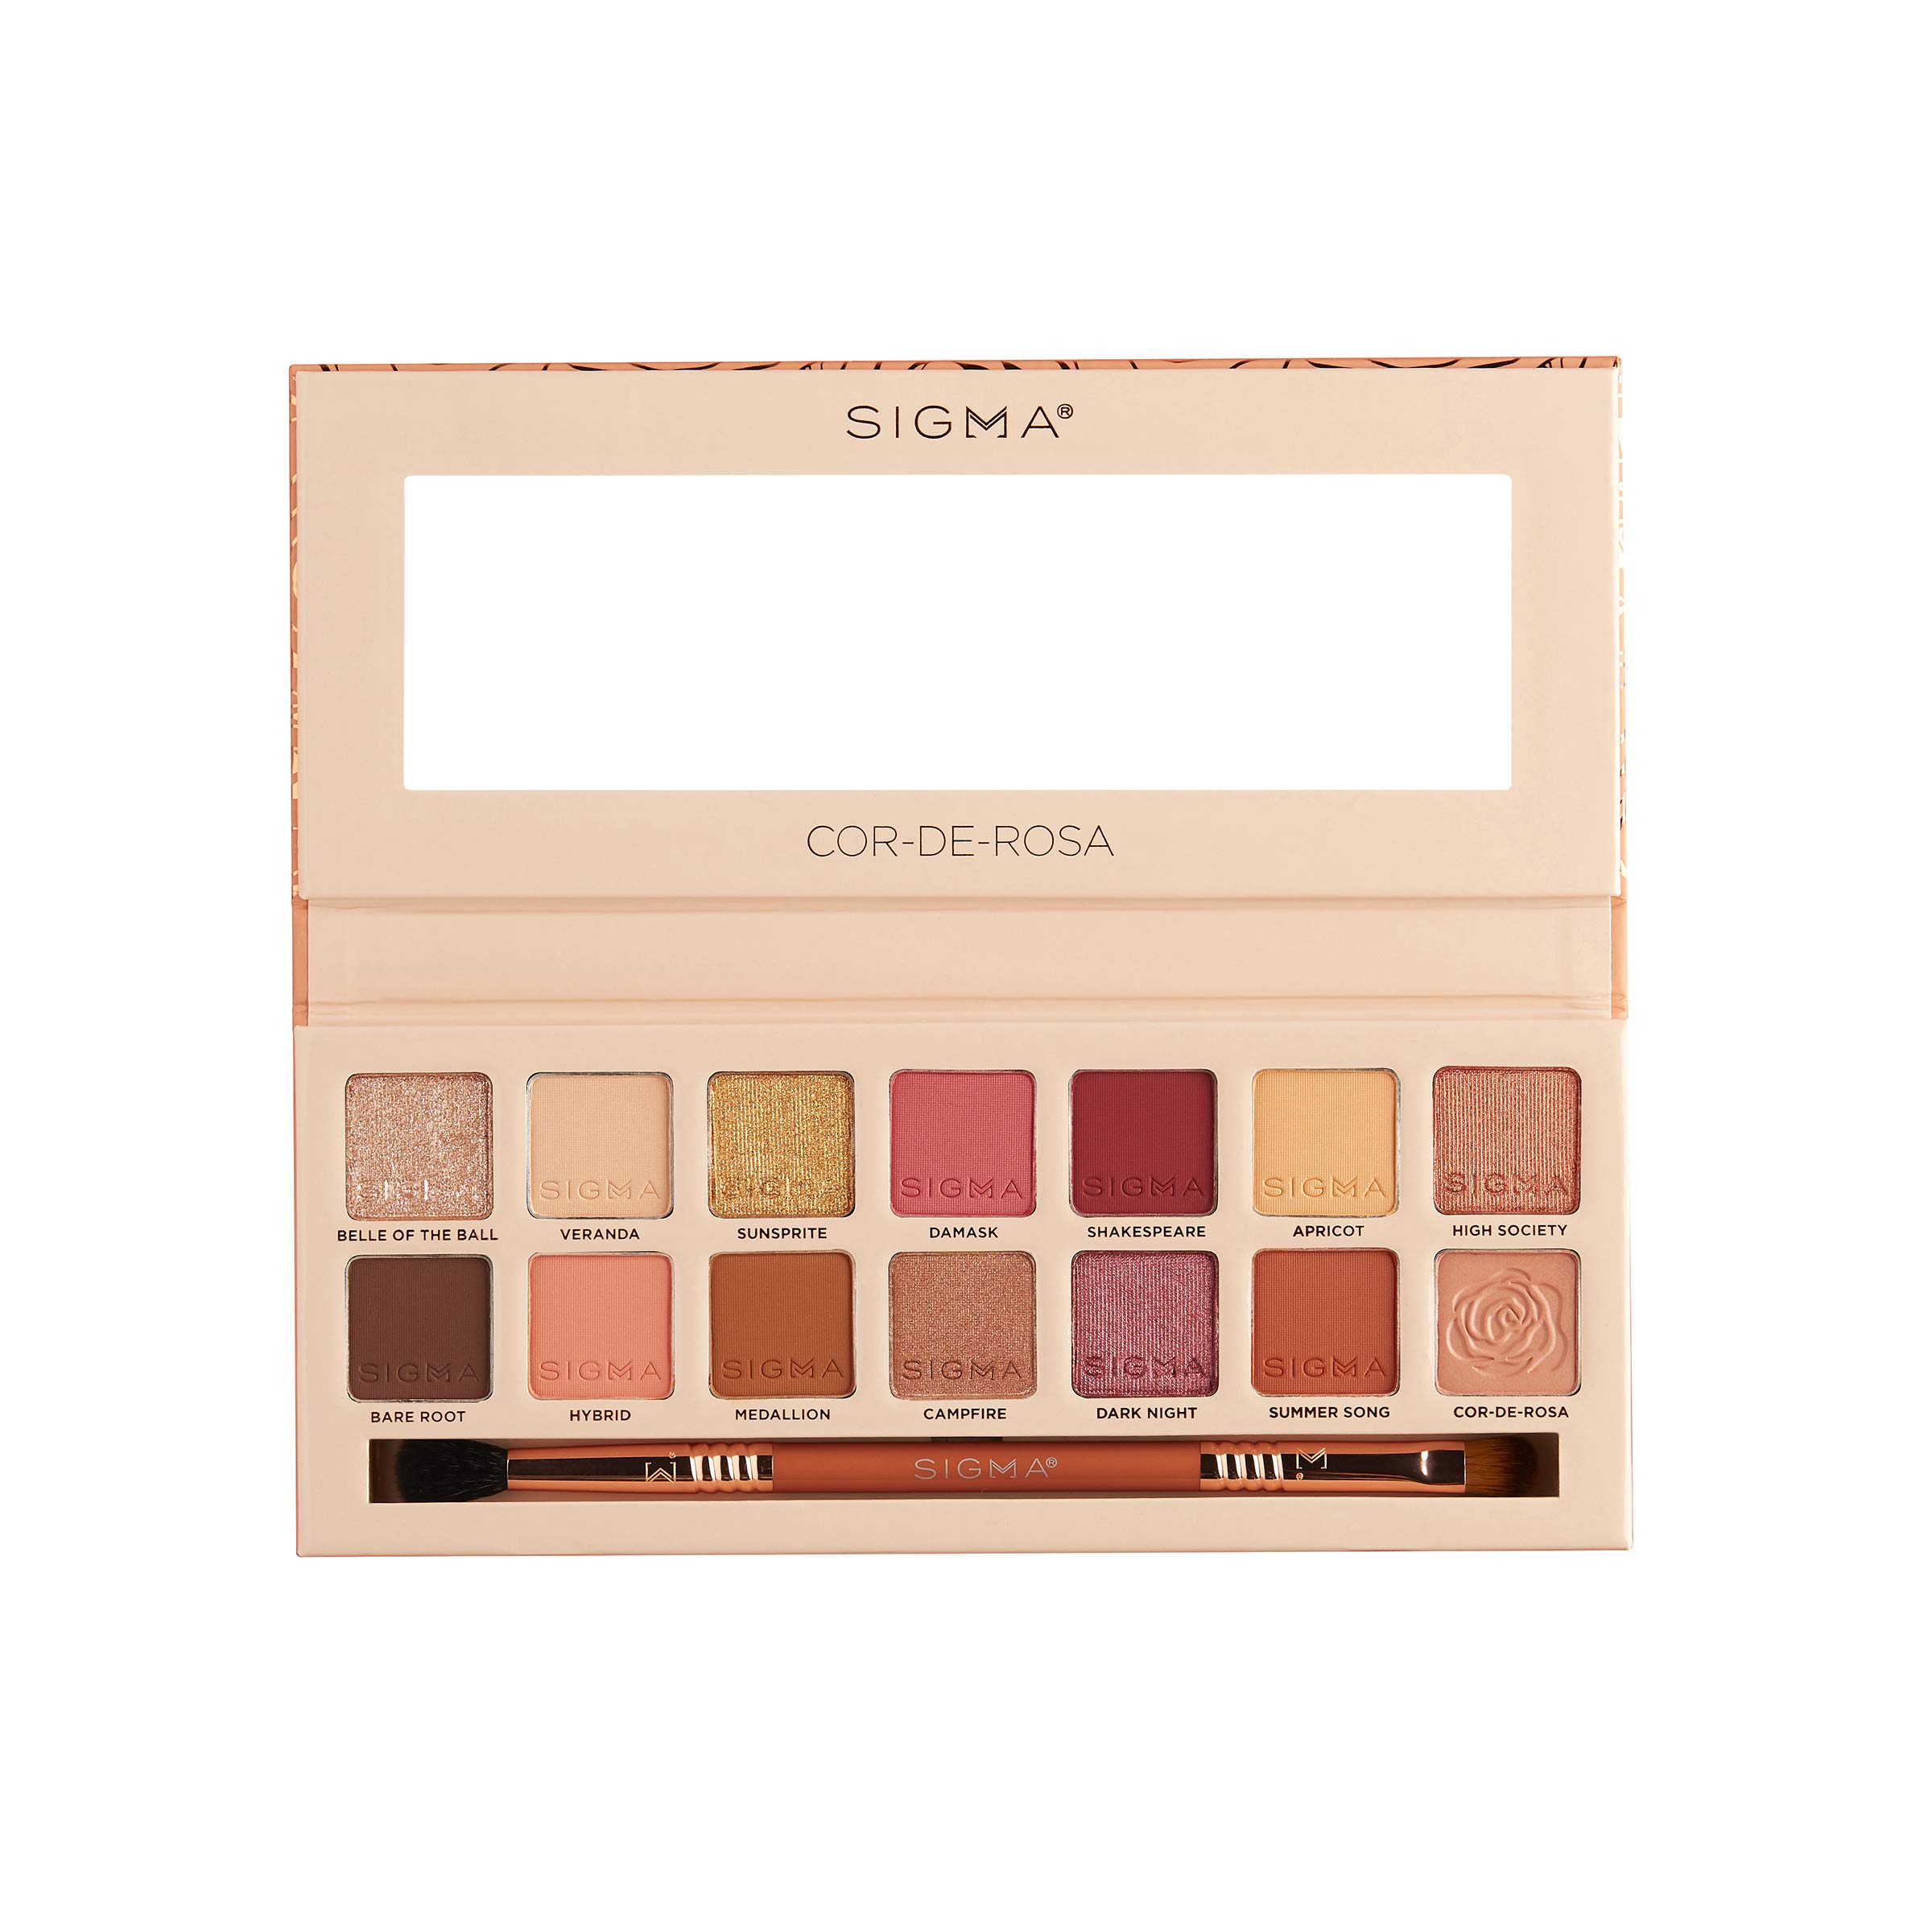 Sigma Beauty Cor-De-Rosa Eyeshadow Palette - 14 Warm Eyeshadow Shades in Matte, Shimmer and Metalic Finishes - Highly Pigmented Vegan Eye Makeup Palette - Clean Beauty Products